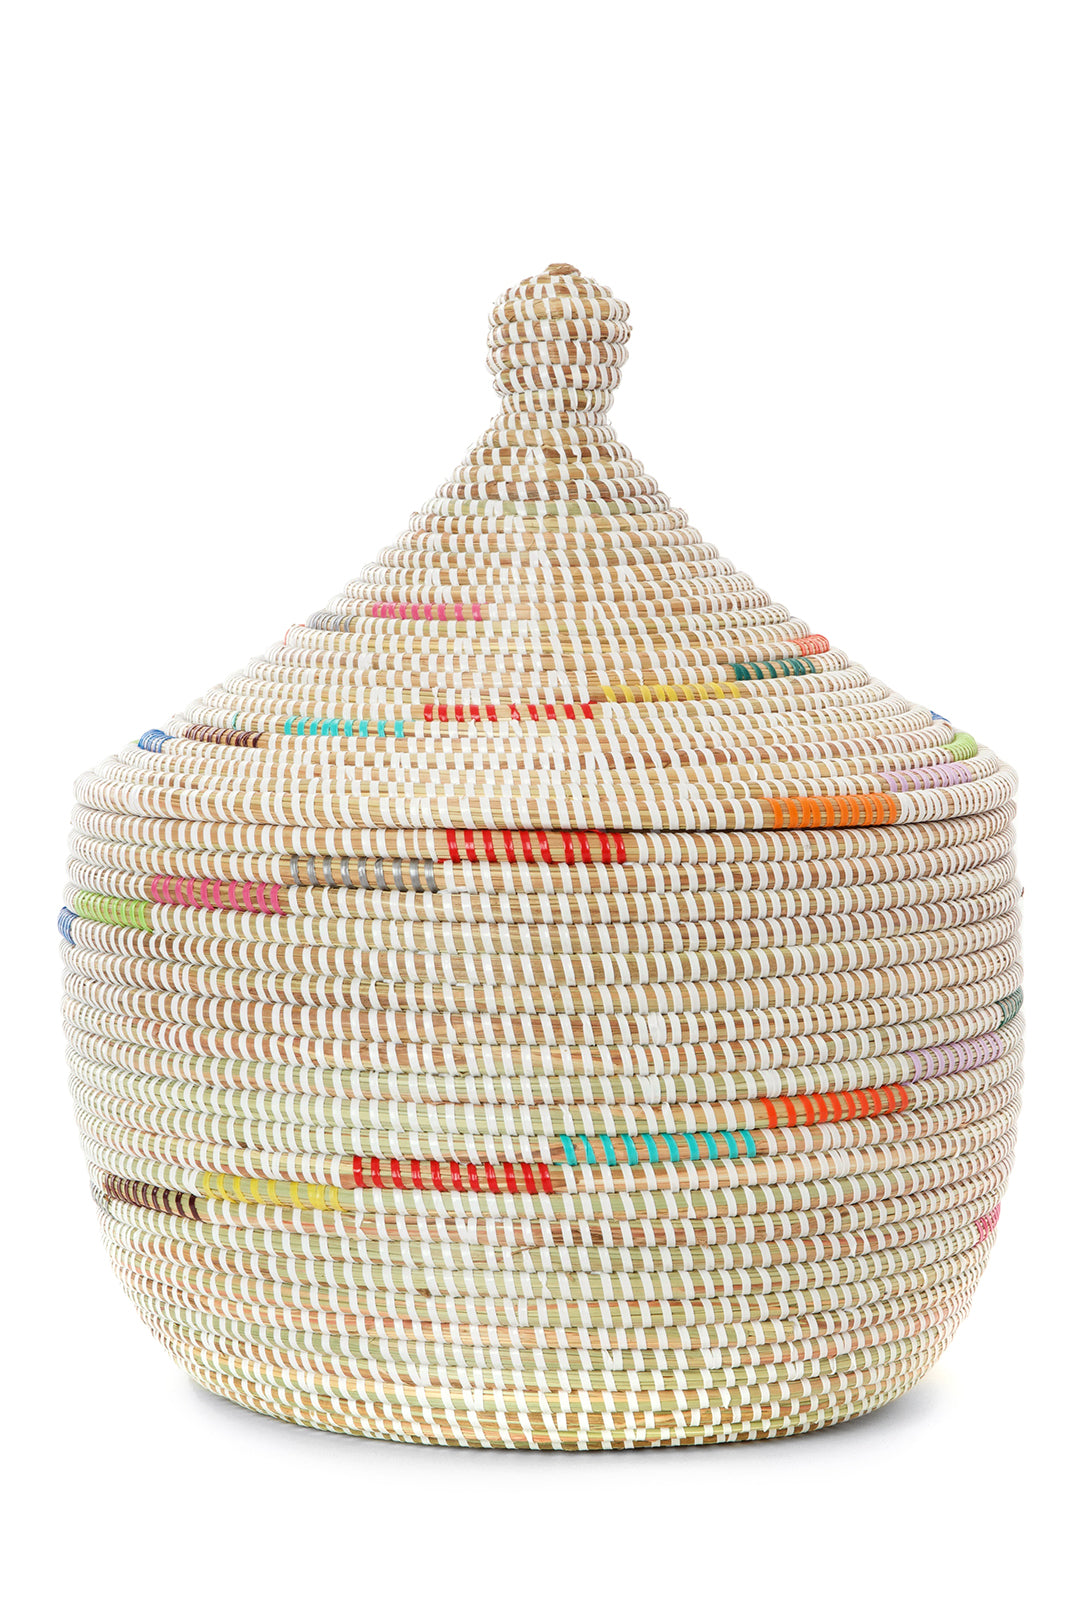 White Warming Basket with Colorful Prism Spiral